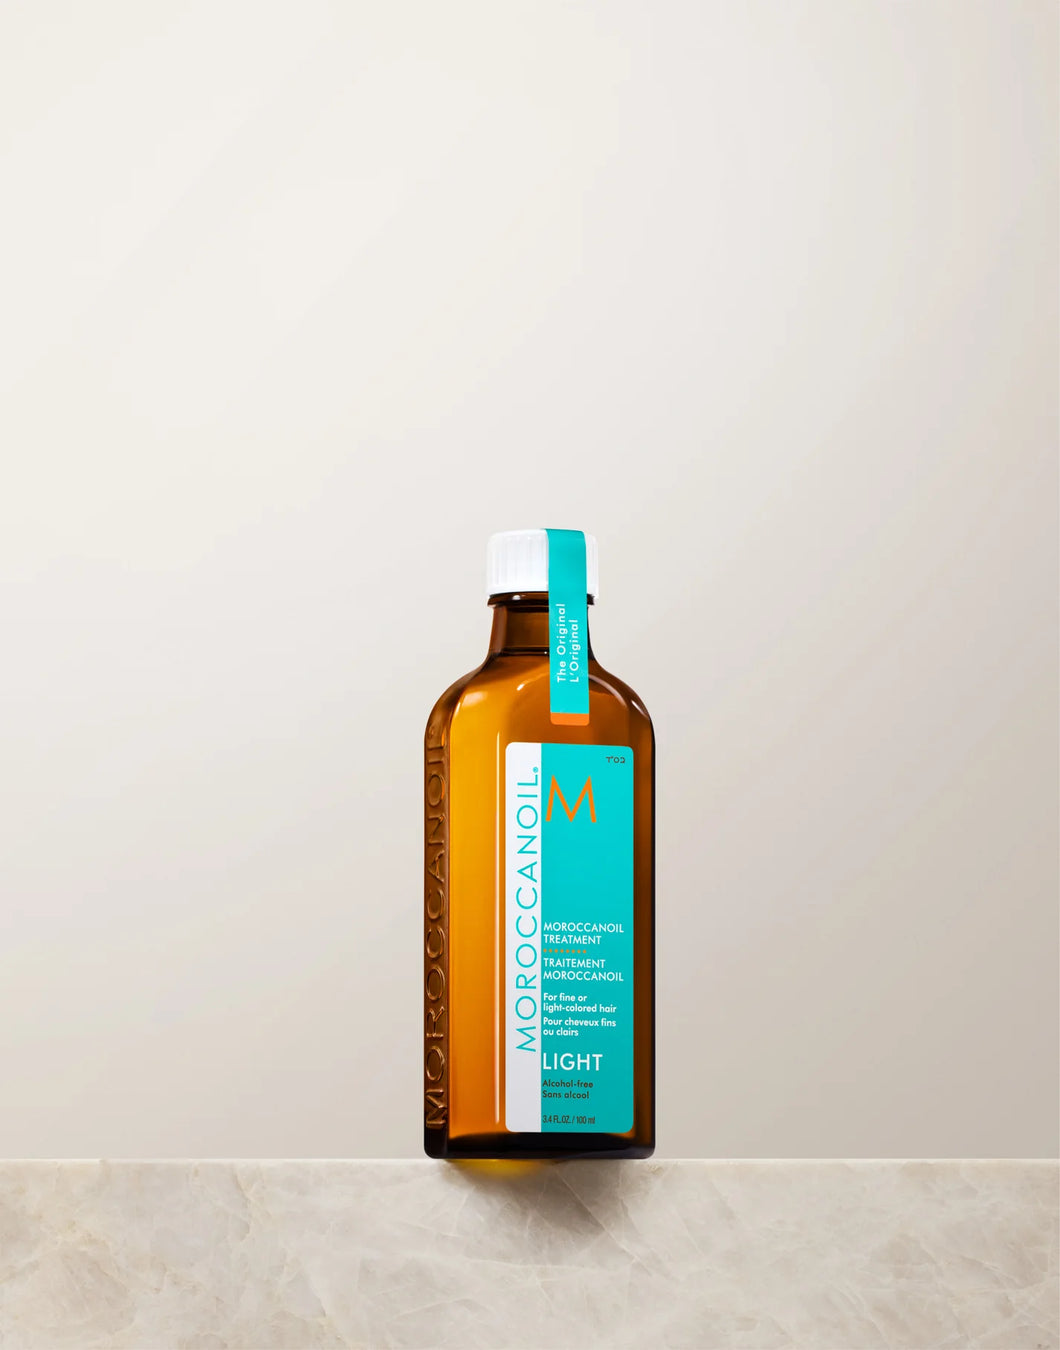 Moroccanoil Treatment Light - For fine or light-colored hair - Travel Size